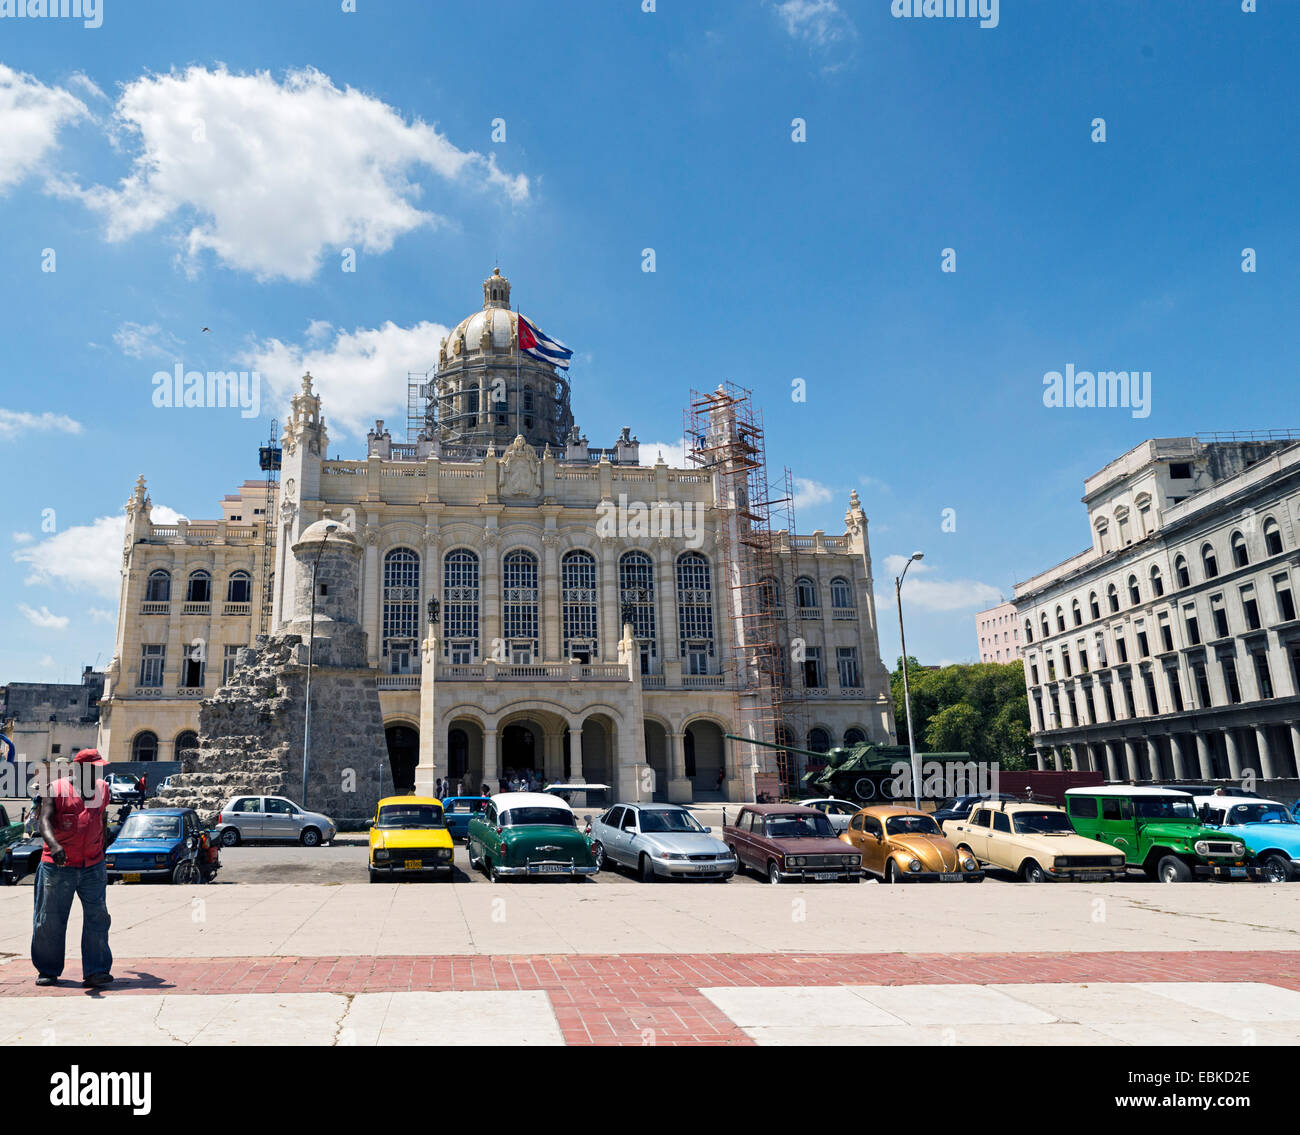 HAVANA - MAY 5: A parking attendant in front of the Museum of the Revolution on May 5, 2014 in Havana, Cuba Stock Photo